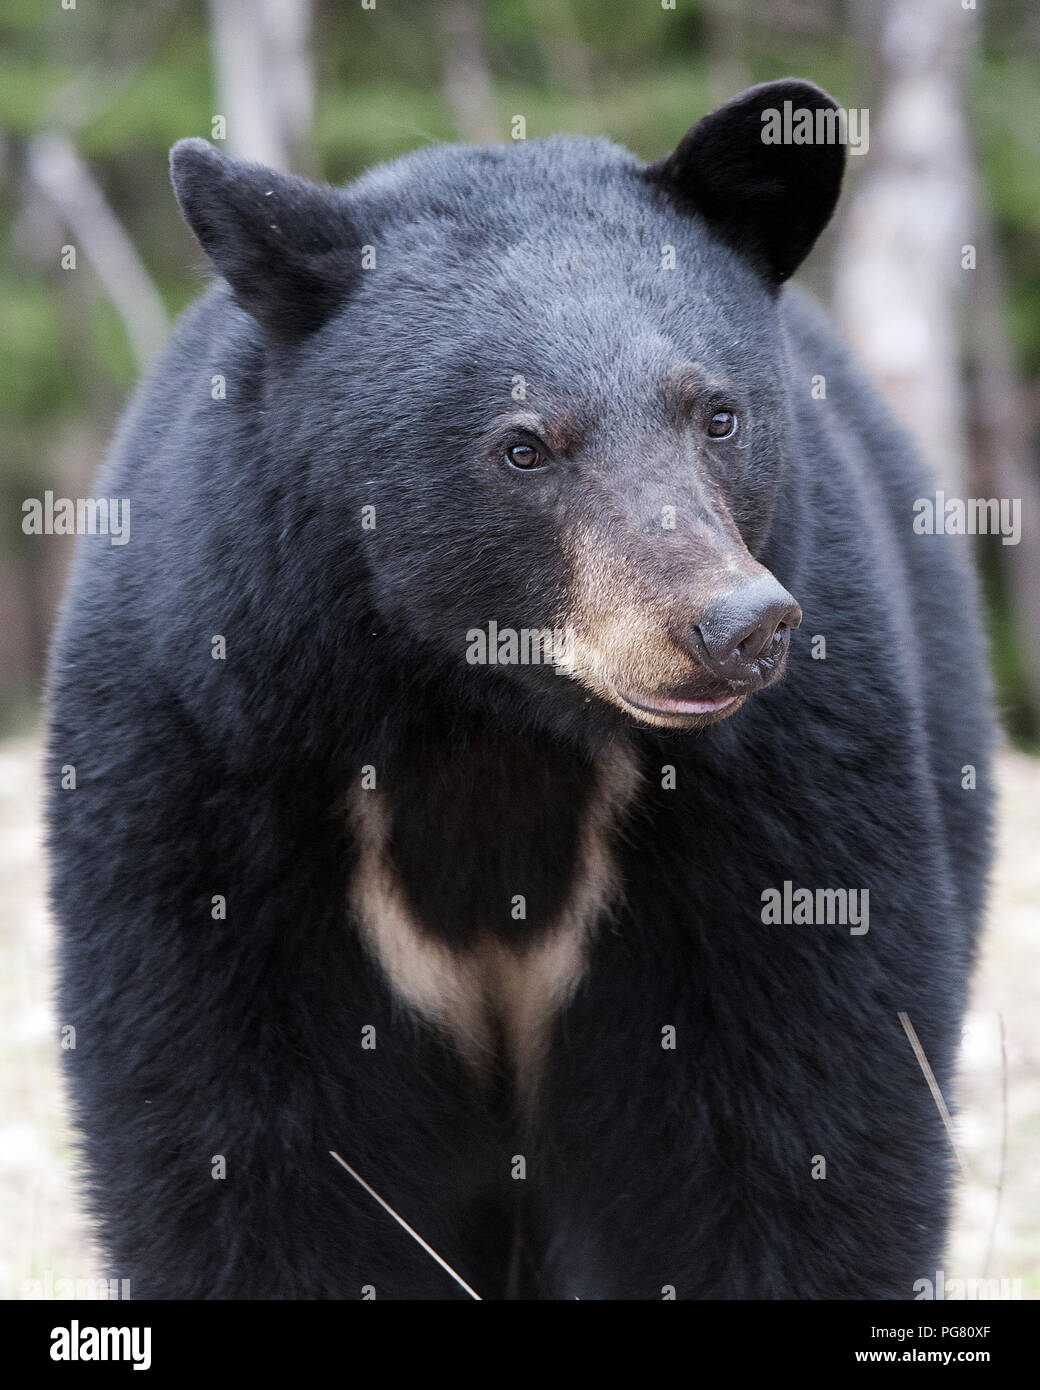 Black bear close up with a lucky charm symbol around its neck and displaying its body, head, ears, eyes, nose, paws and enjoying its surrounding. Stock Photo